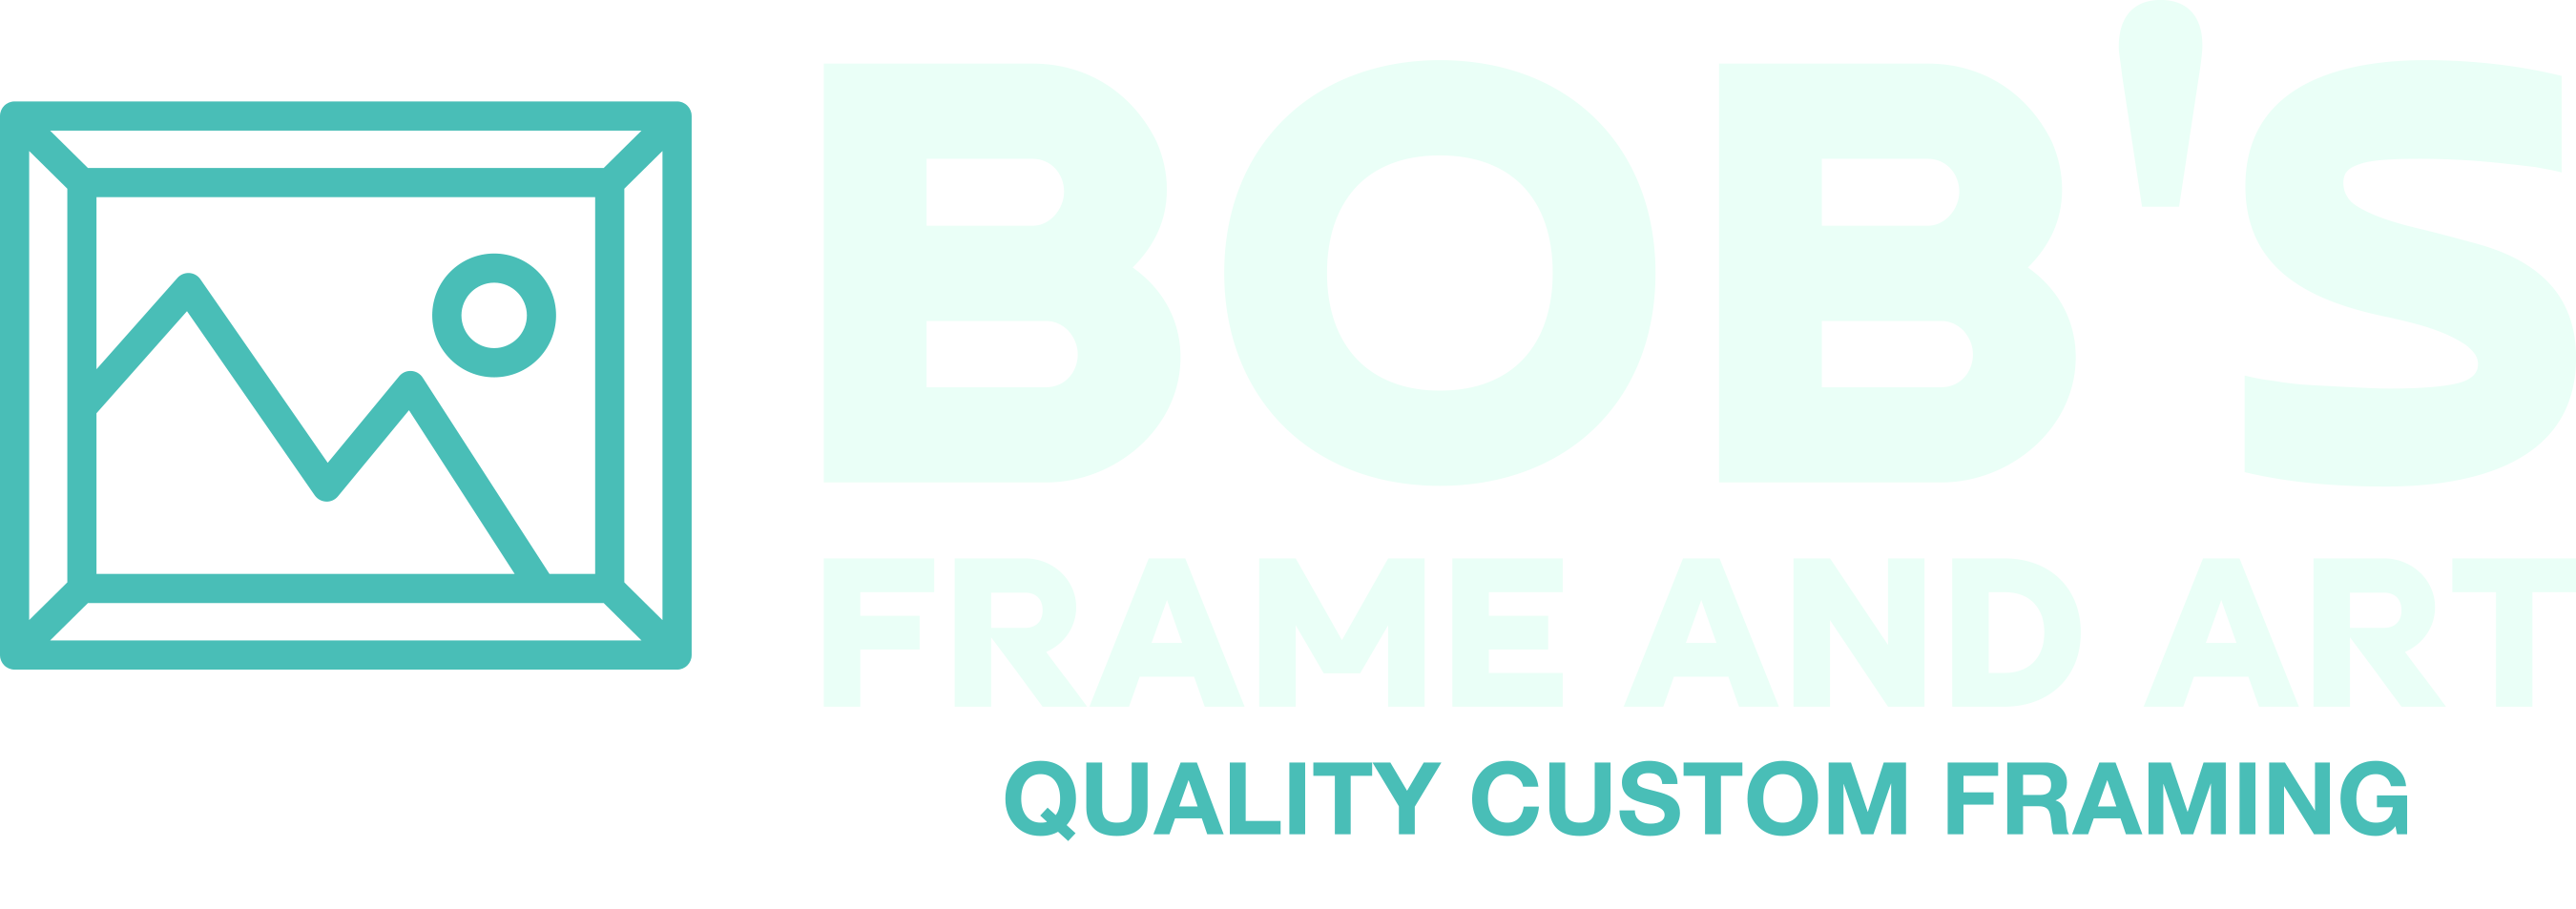 Bob's Frame and Art, Custom Quality Picture Framing